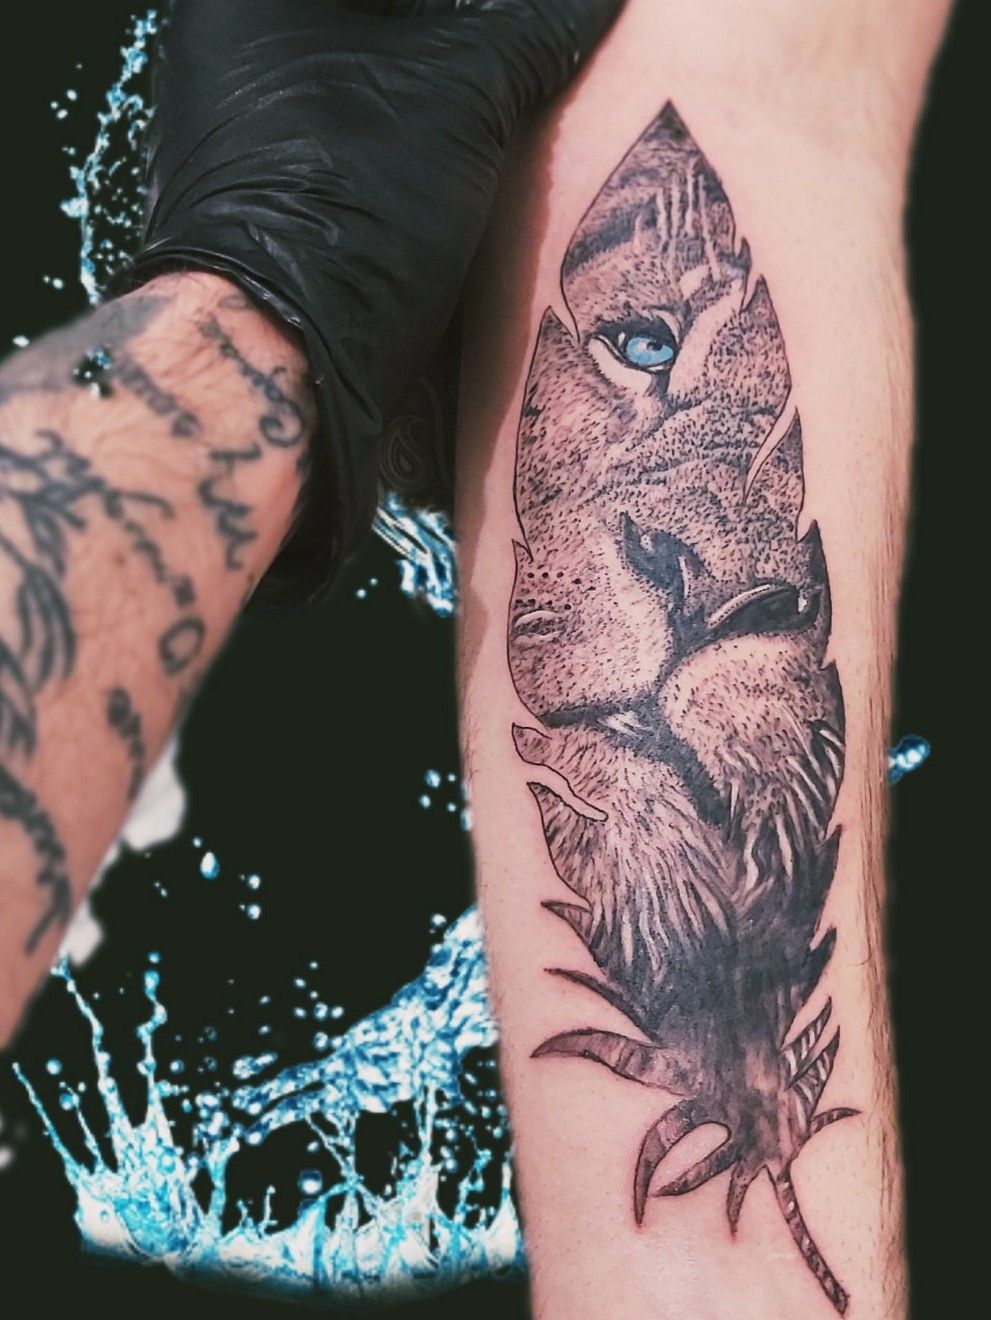 22 Unique Tattoo Ideas That Are Not Flowers, Arrows, Or Geometrical Figures  - Cultura Colectiva